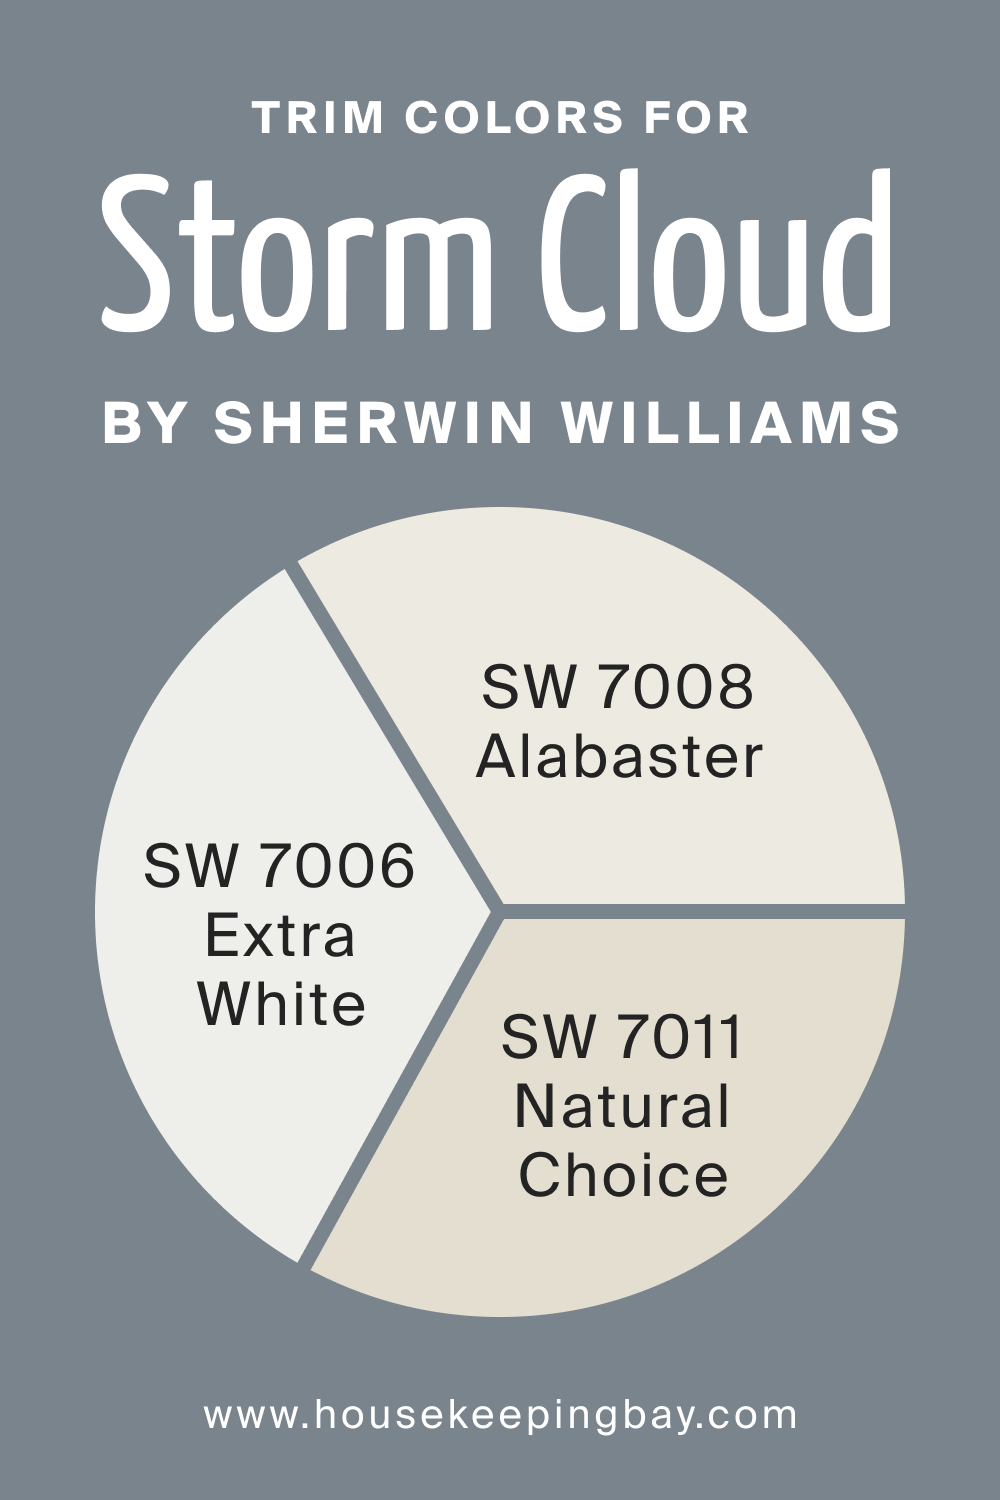 Trim Colors of SW 6249 Storm Cloud by Sherwin Williams